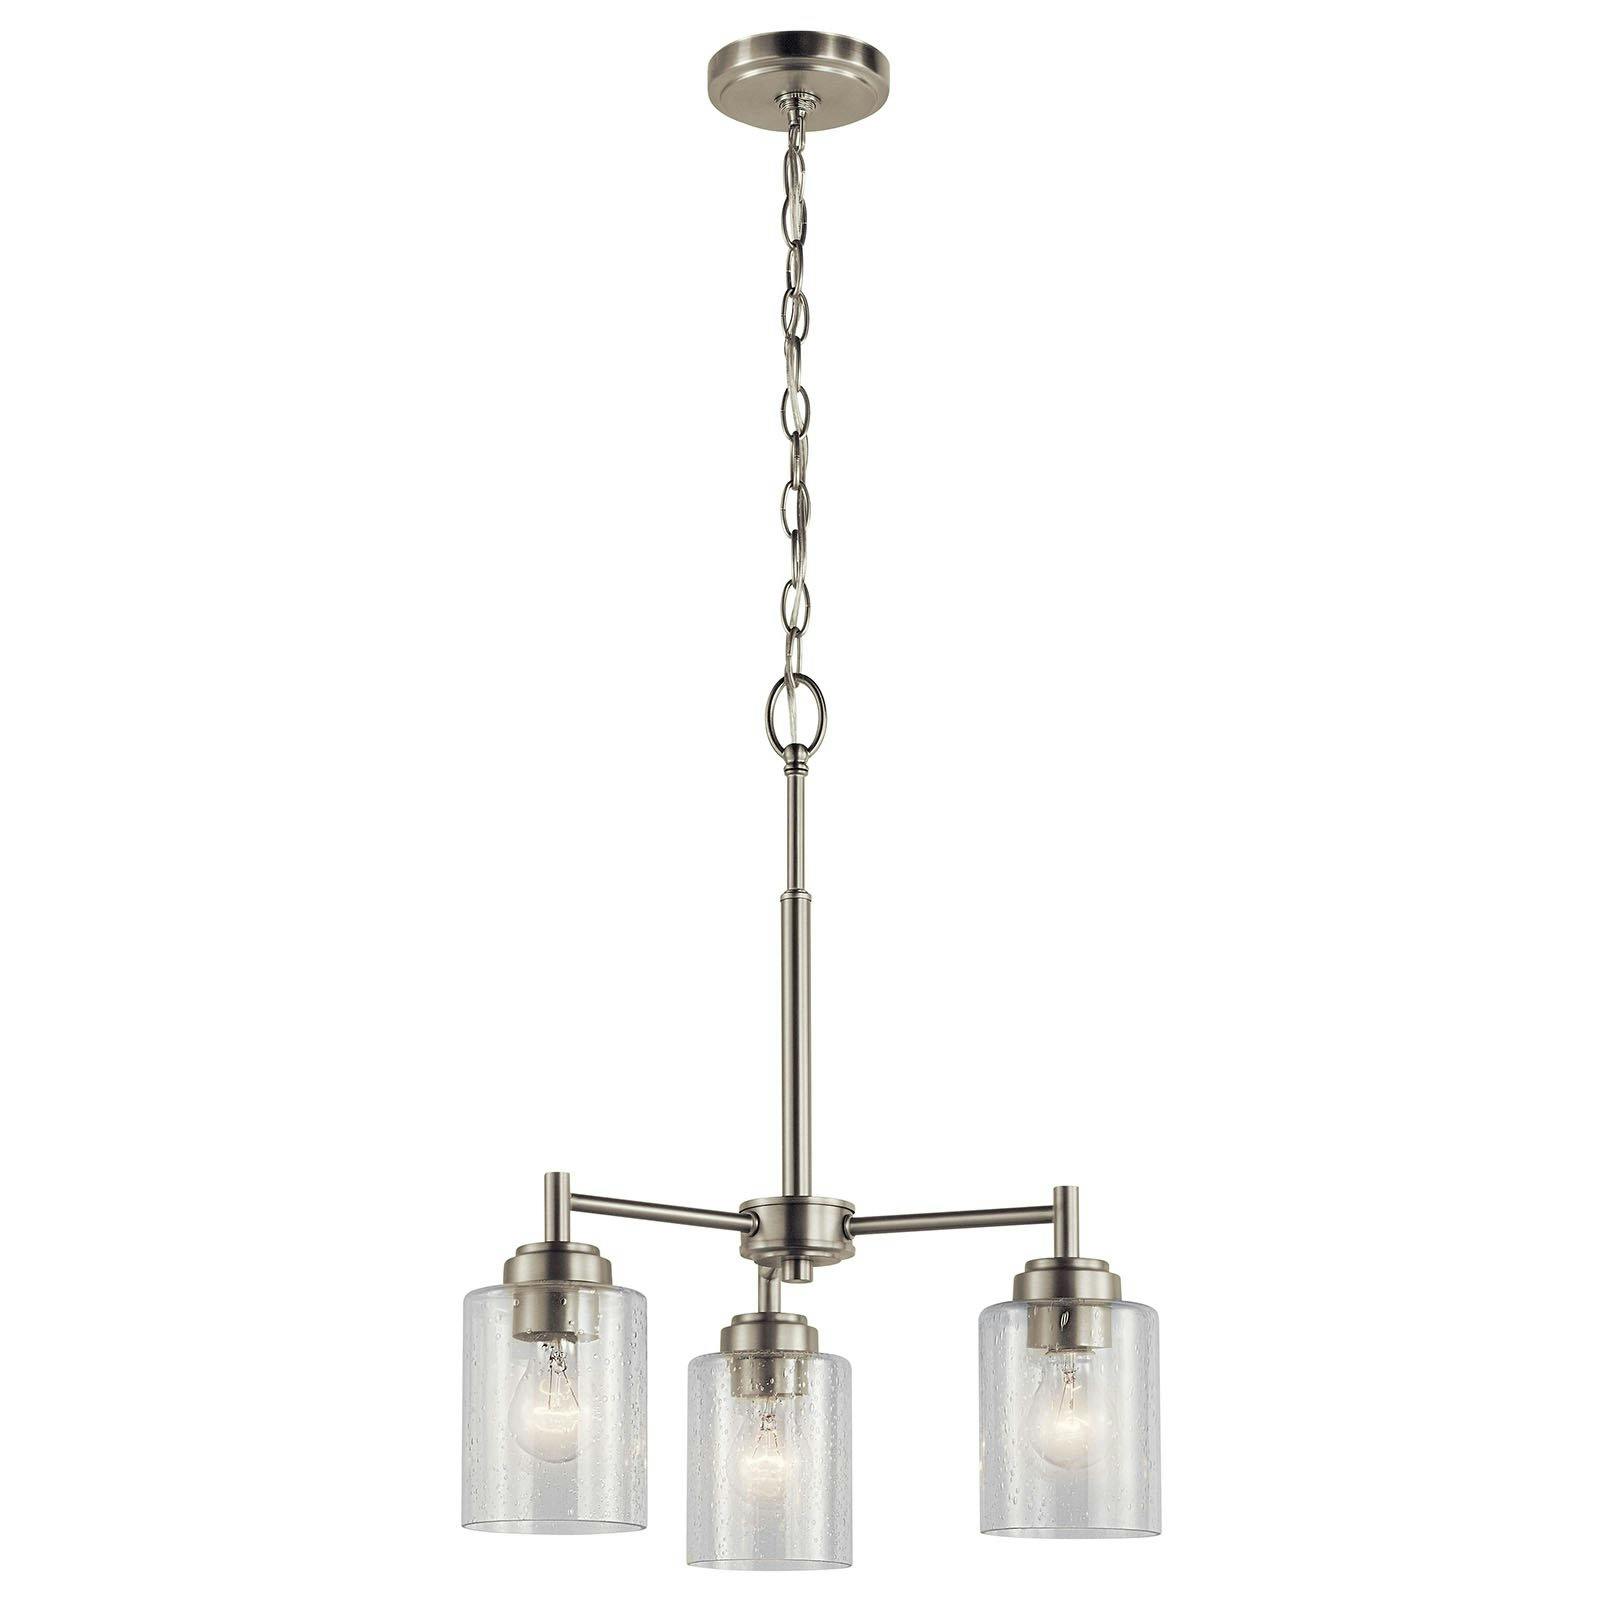 The Winslow 15.25"  Mini Chandelier Nickel facing down on a white background